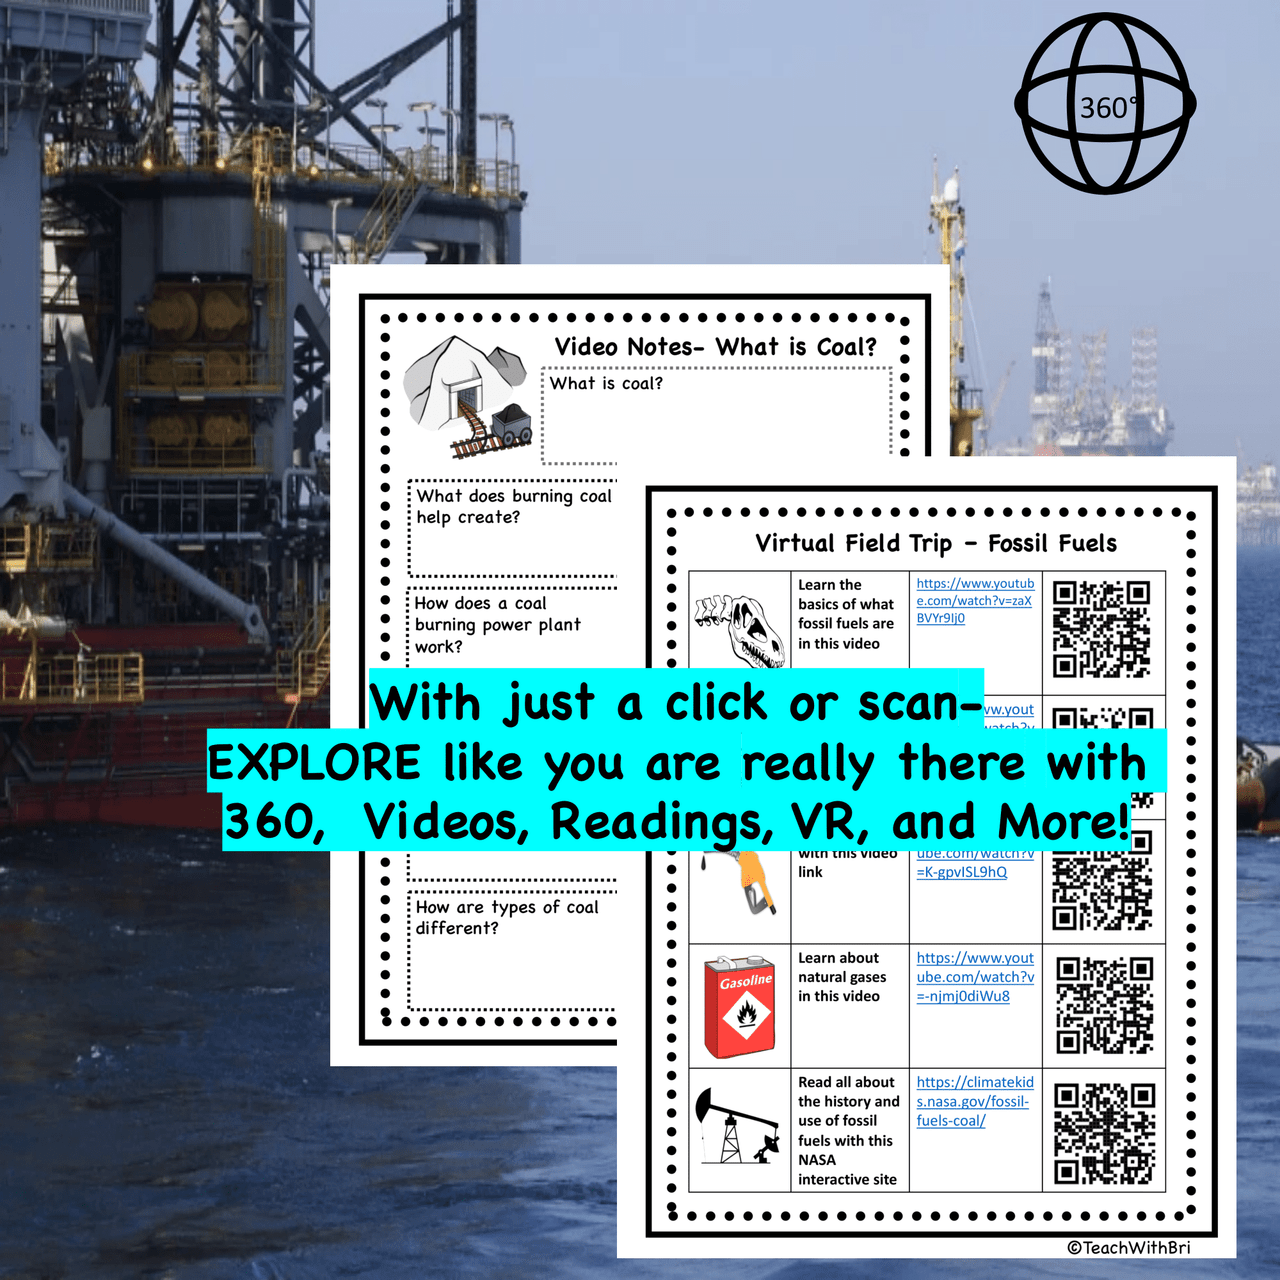  Fossil Fuels Virtual Field Trip  - Printable and Digital Versions Included